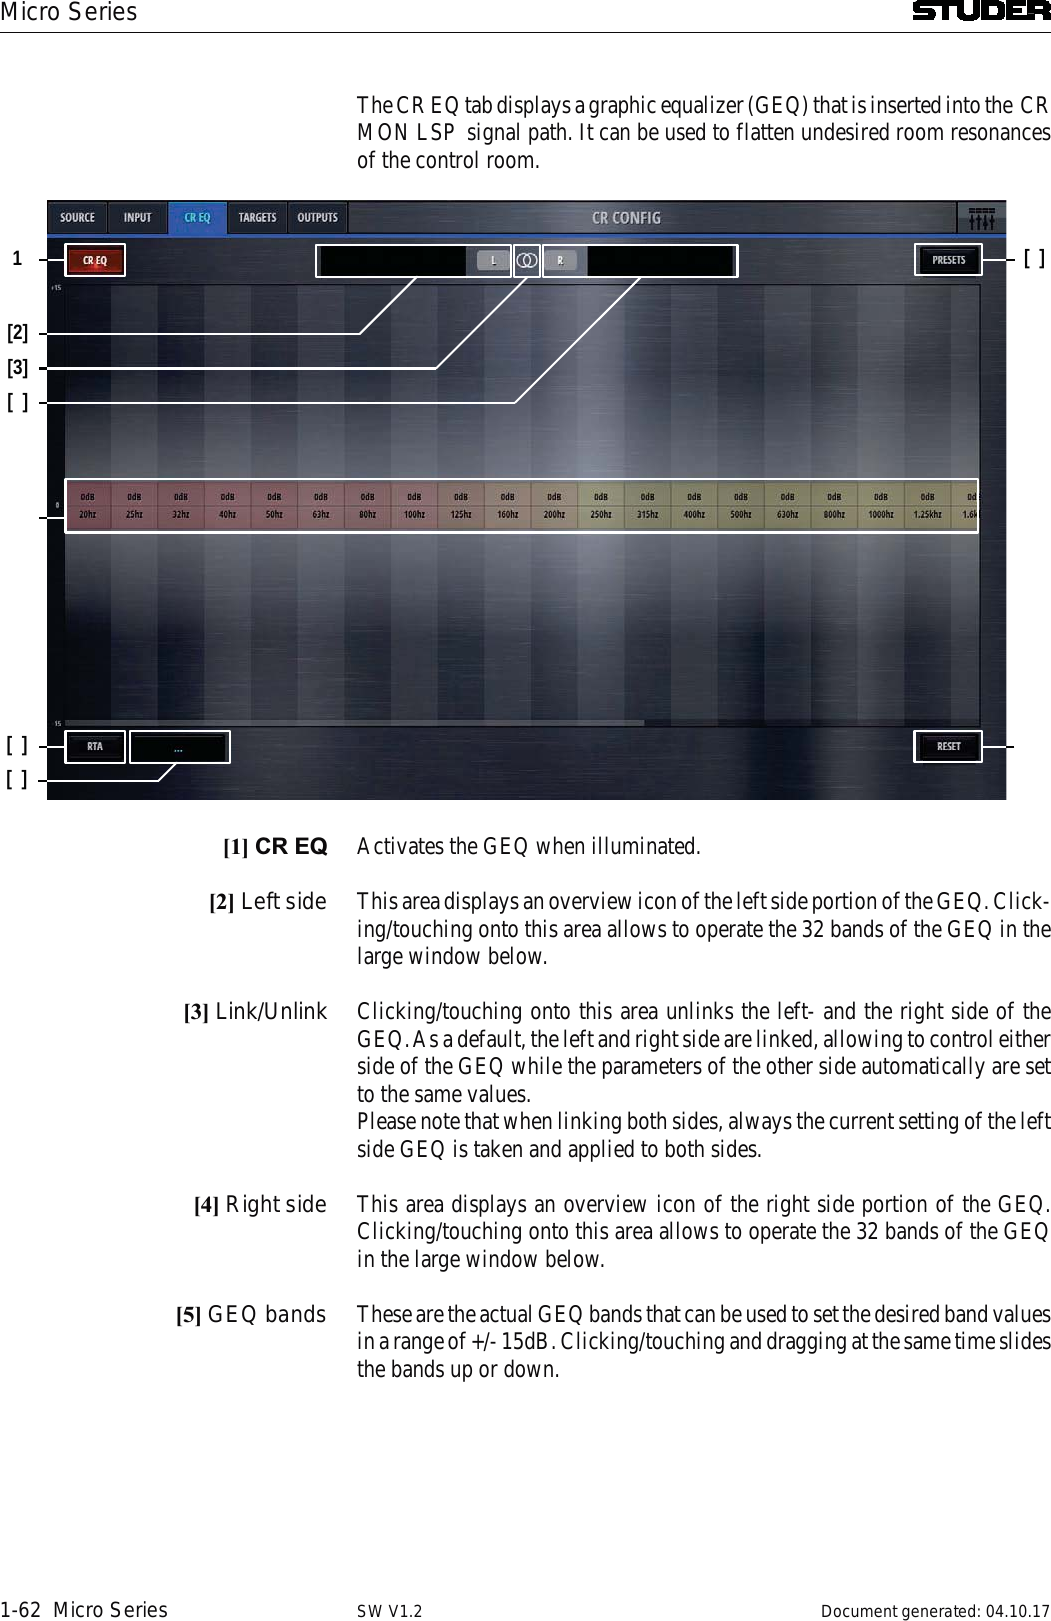 Micro Series1-62  Micro Series Document generated: 04.10.17SW V1.2The CR EQ tab displays a graphic equalizer (GEQ) that is inserted into the  CRMON LSP  signal path. It can be used to flatten undesired room resonances  of the control room. 1[2][][][3][][][1] CR EQ Activates the GEQ when illuminated.[2] Left side This area displays an overview icon of the left side portion of the GEQ. Click-ing/touching onto this area allows to operate the 32 bands of the GEQ in the large window below. [3] Link/Unlink Clicking/touching onto this area unlinks the left- and the right side of the GEQ. As a default, the left and right side are linked, allowing to control either side of the GEQ while the parameters of the other side automatically are set to the same values.Please note that when linking both sides, always the current setting of the left side GEQ is taken and applied to both sides.[4] Right side This area displays an overview icon of the right side portion of the GEQ. Clicking/touching onto this area allows to operate the 32 bands of the GEQ in the large window below.[5] GEQ bands These are the actual GEQ bands that can be used to set the desired band values in a range of +/- 15dB. Clicking/touching and dragging at the same time slides the bands up or down.